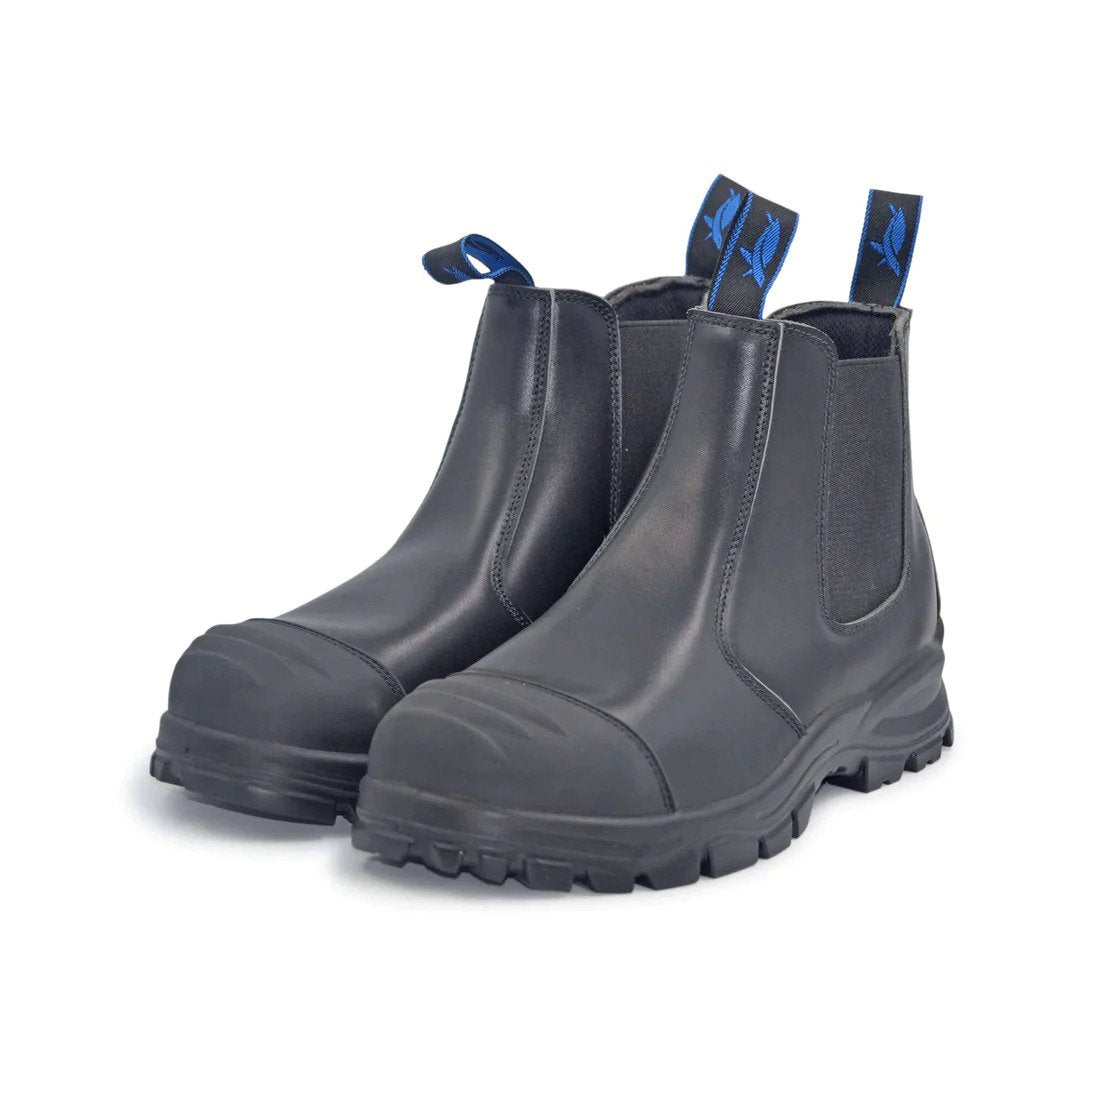 Work Boots: Essential Footwear for Safety and Comfort at Work